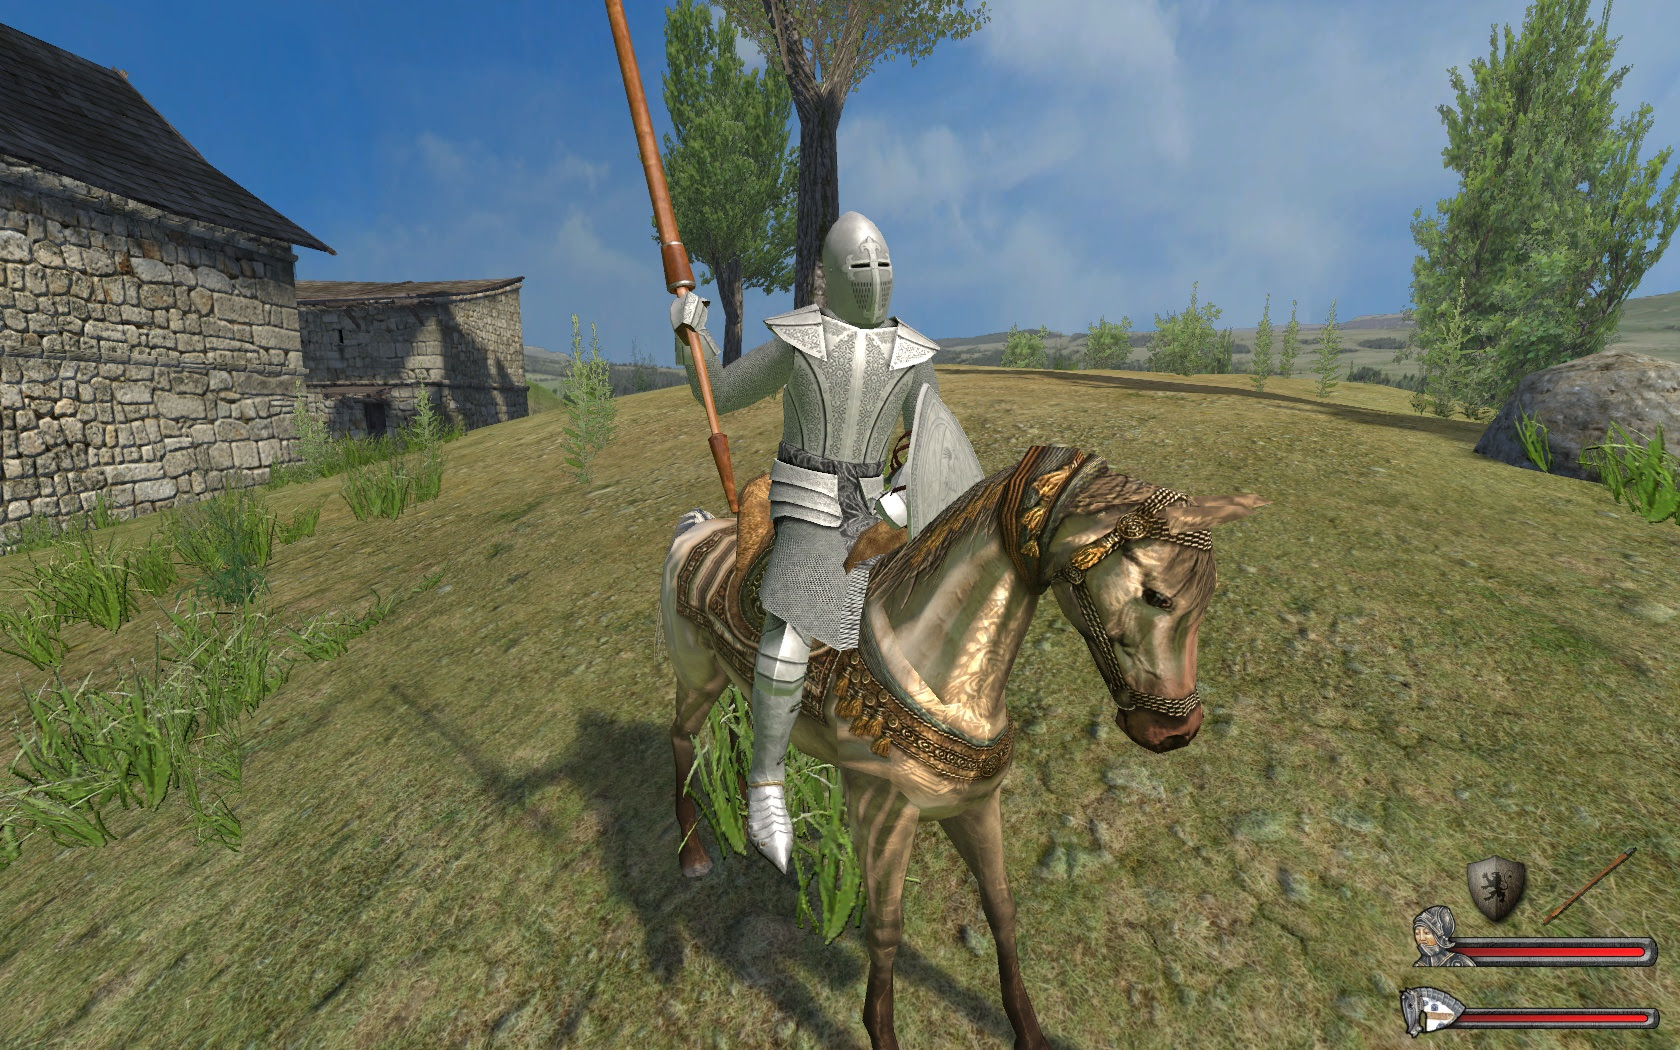 Mount blade warband моды на русском. Warband Prophesy of Pendor. Mount and Blade Warband Prophesy of Pendor. MB Warband Prophesy of Pendor. Prophesy of Pendor Art.